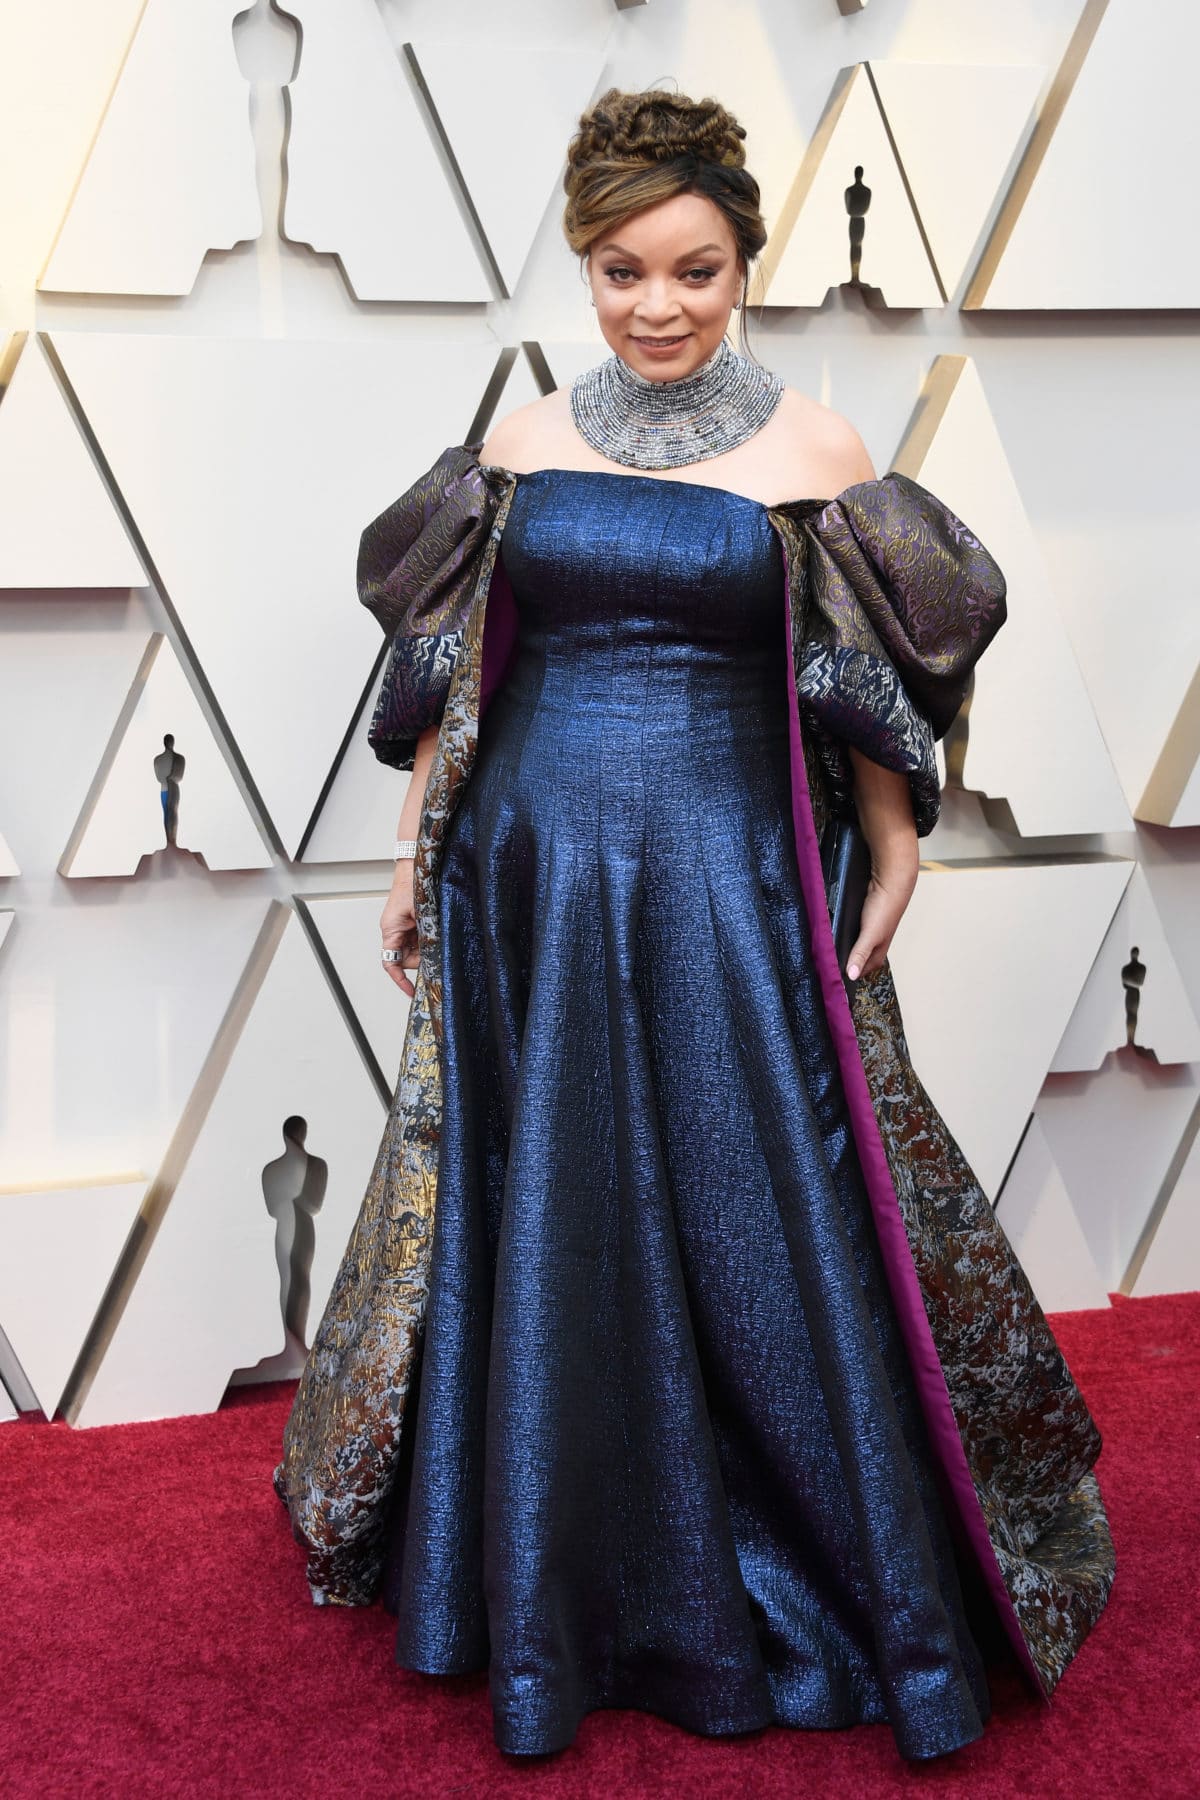 Ruth E. Carter The First Black Woman To Win Oscar For Best